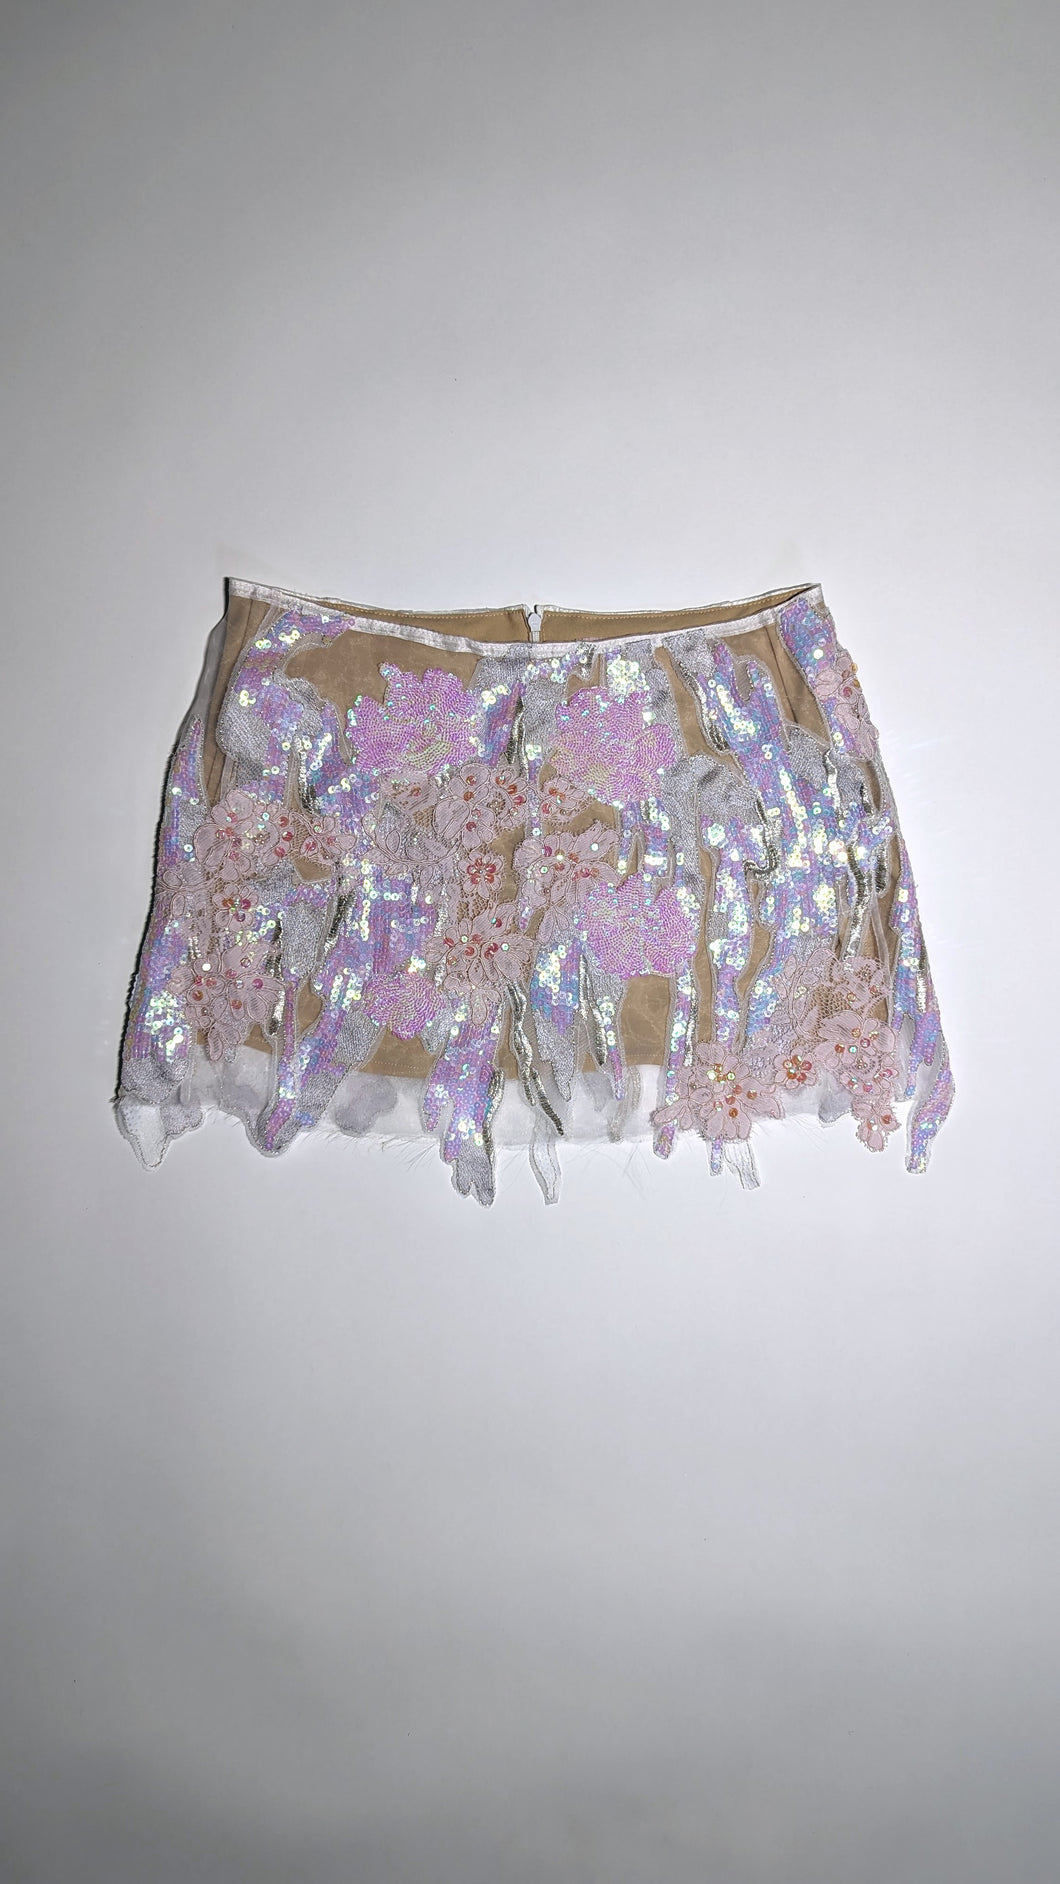 Skirt with Lace & Sequin Flowers - Pre-order